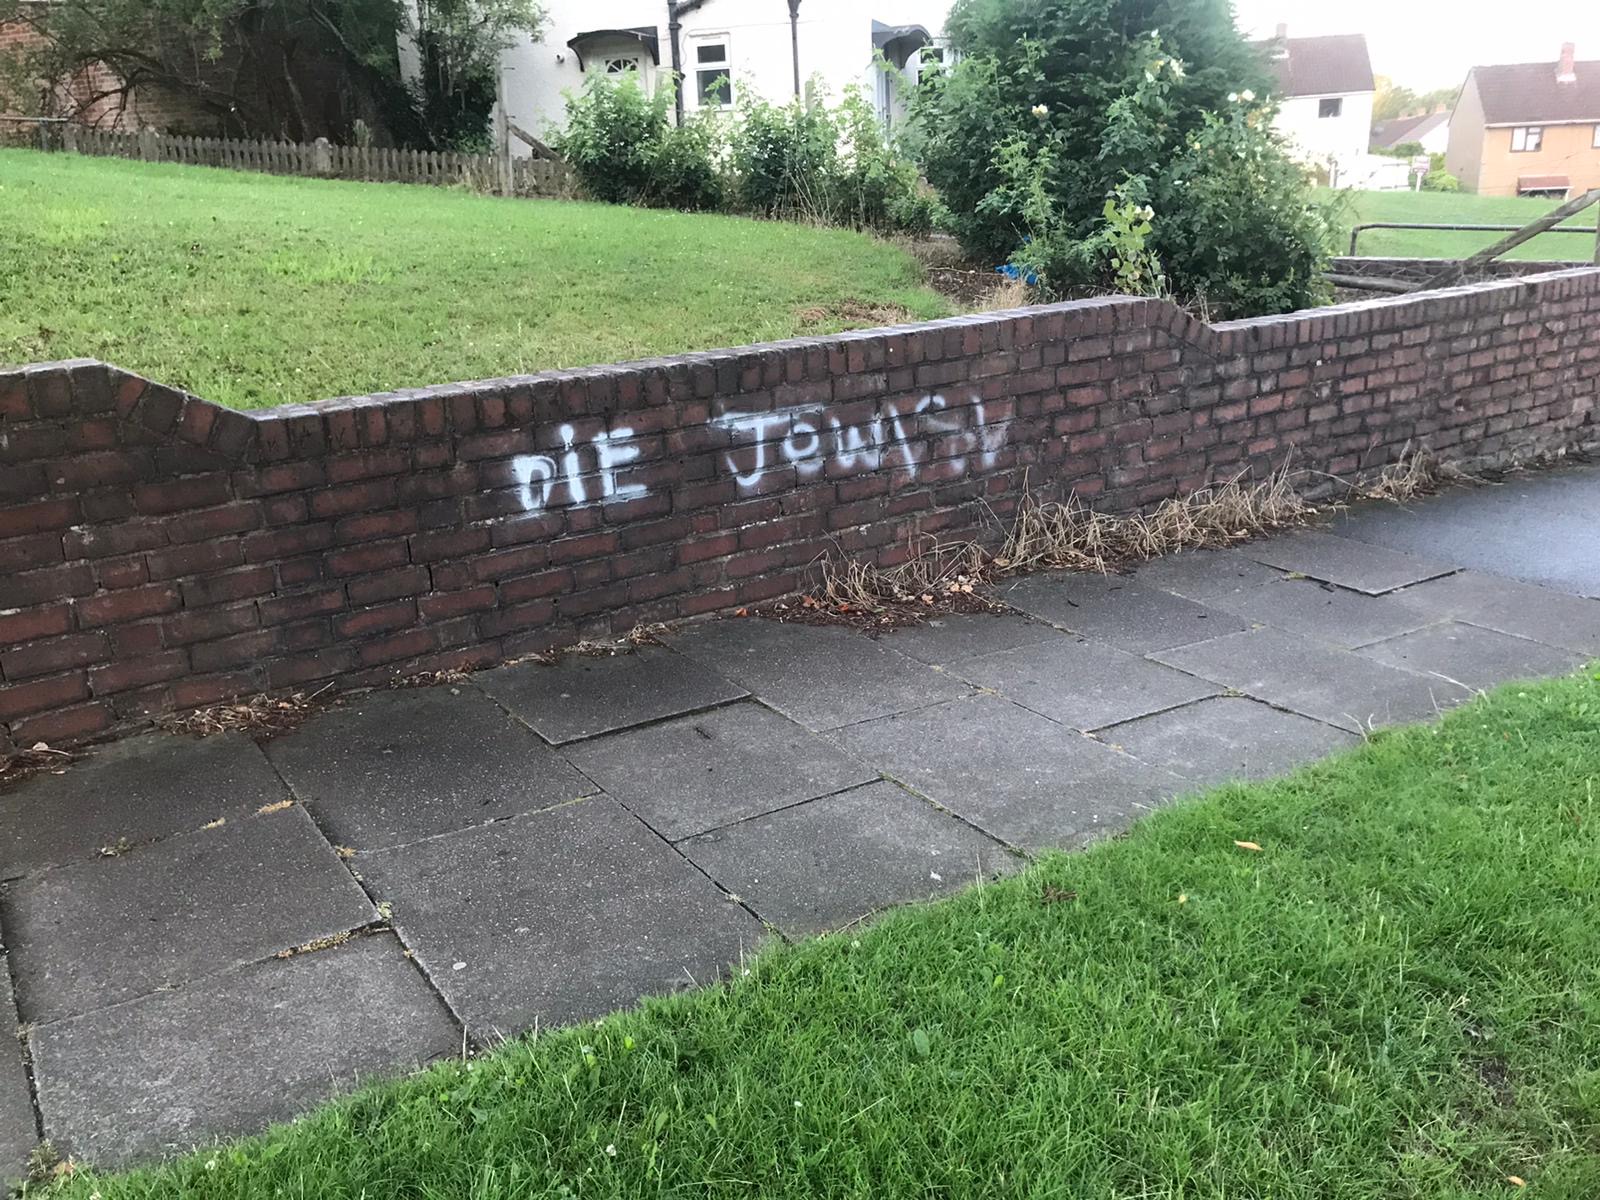 An example of anti-Semitic graffiti found in July 